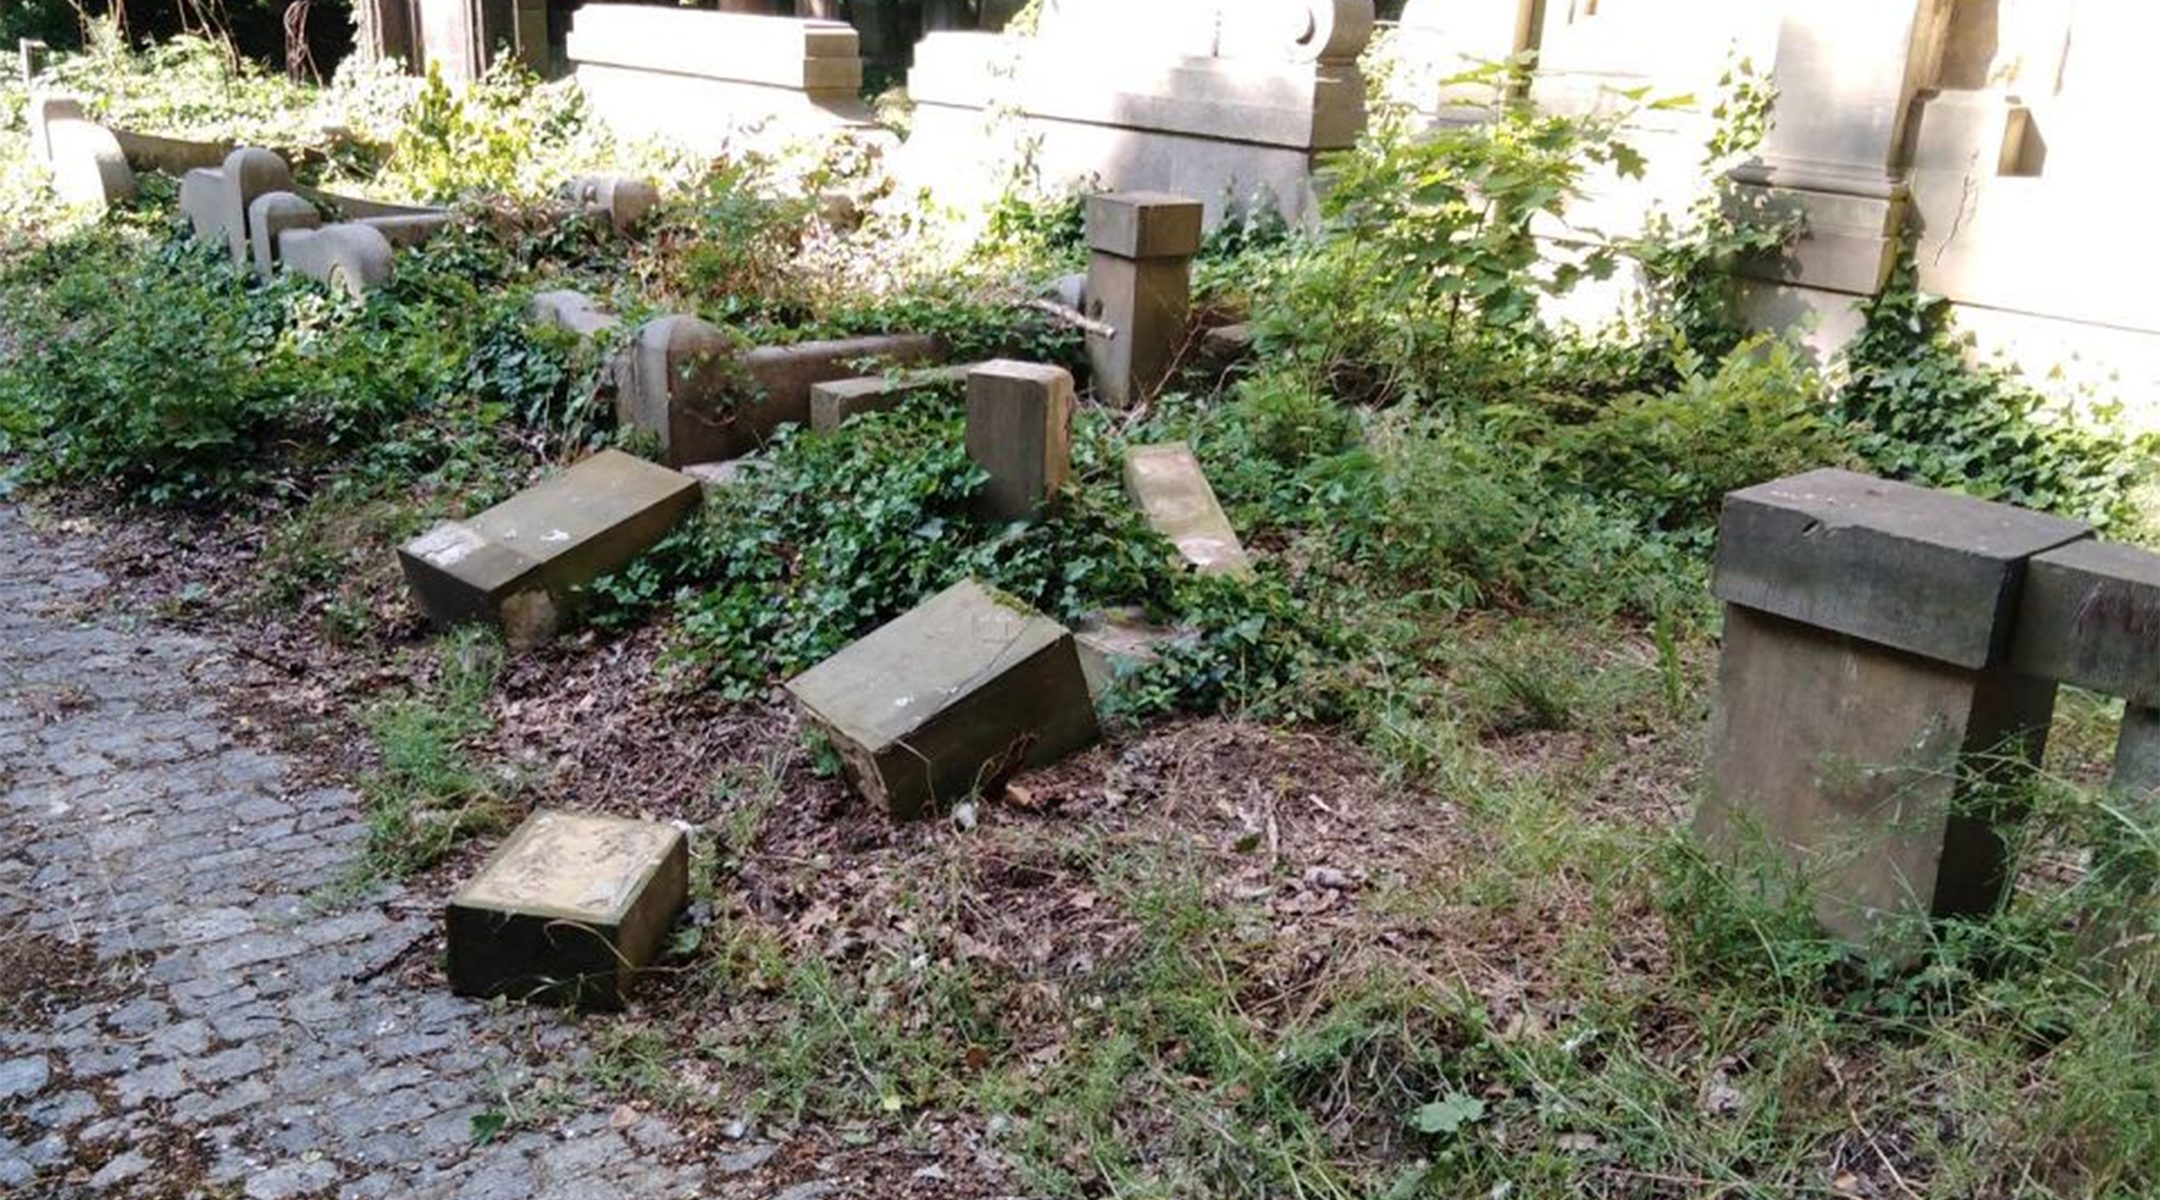 Toppled and smashed headstone lie scattered at the Jewish Cemetery of Wroclaw, Poland on June 16, 2021. (The Jewish Community of Wroclaw)